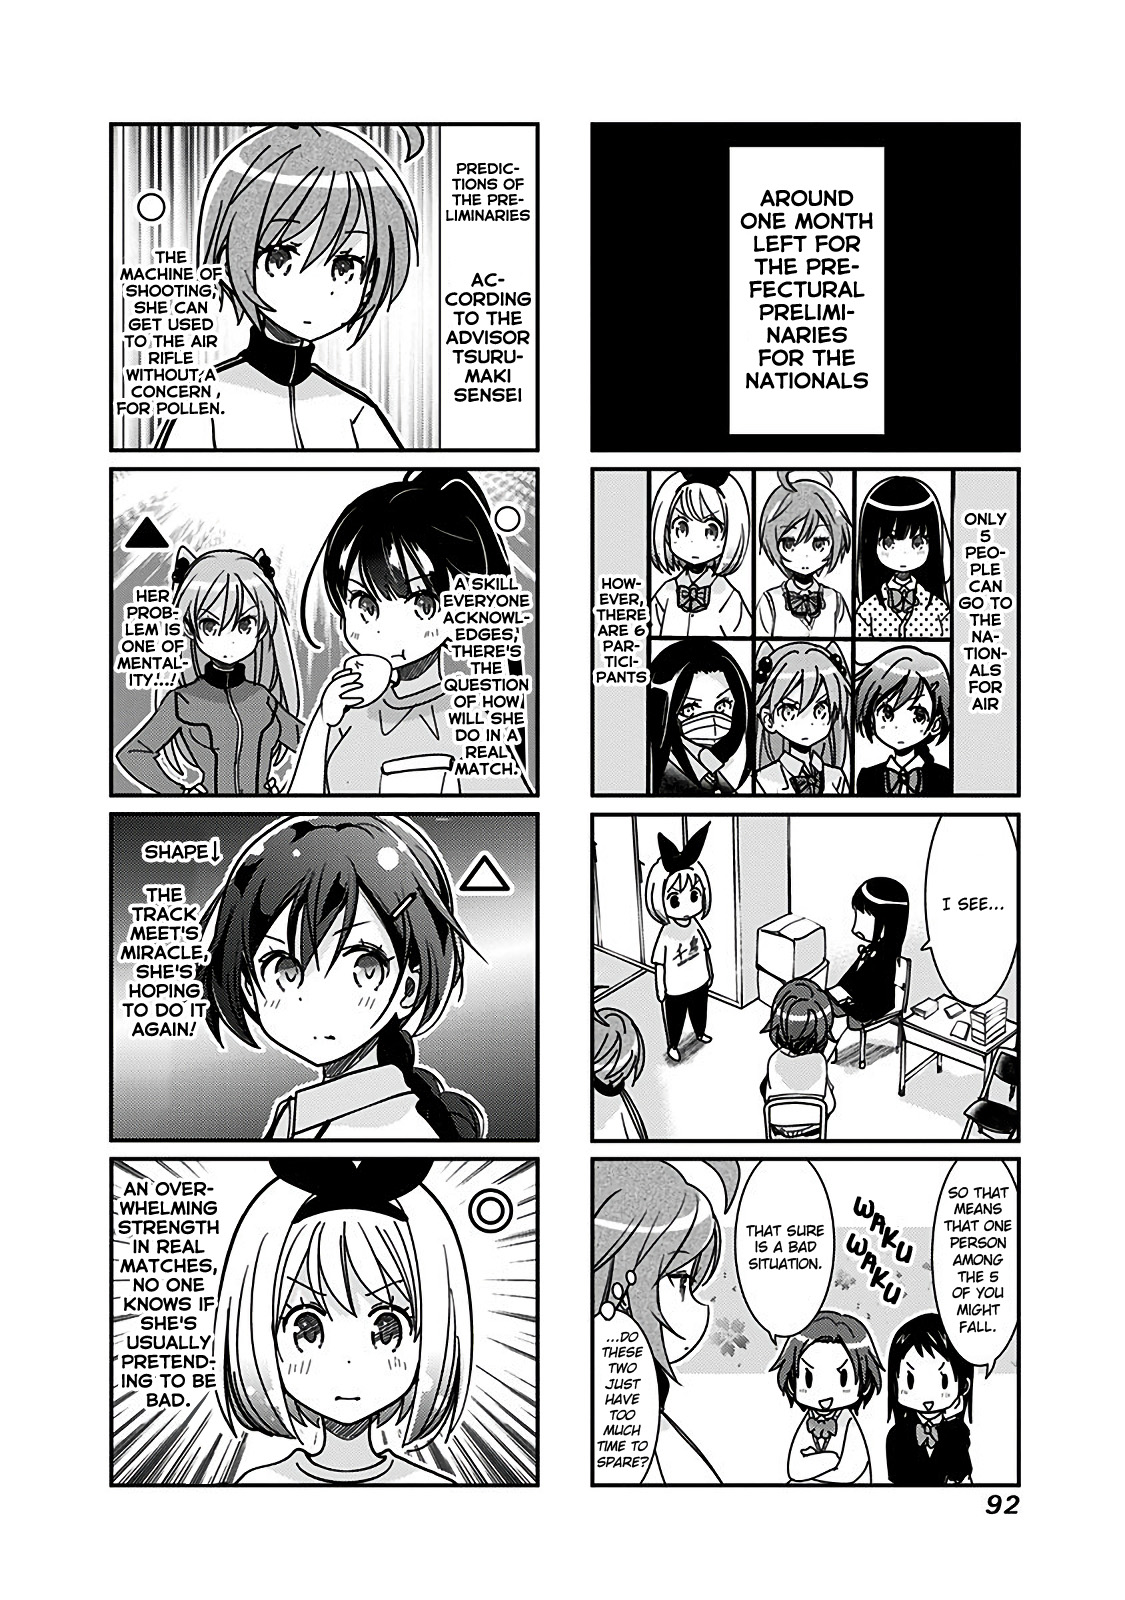 Rifle Is Beautiful Vol.6 Chapter 152: Marina And Ako, The Childhood Friends Appear On The Anime Too! - Picture 3